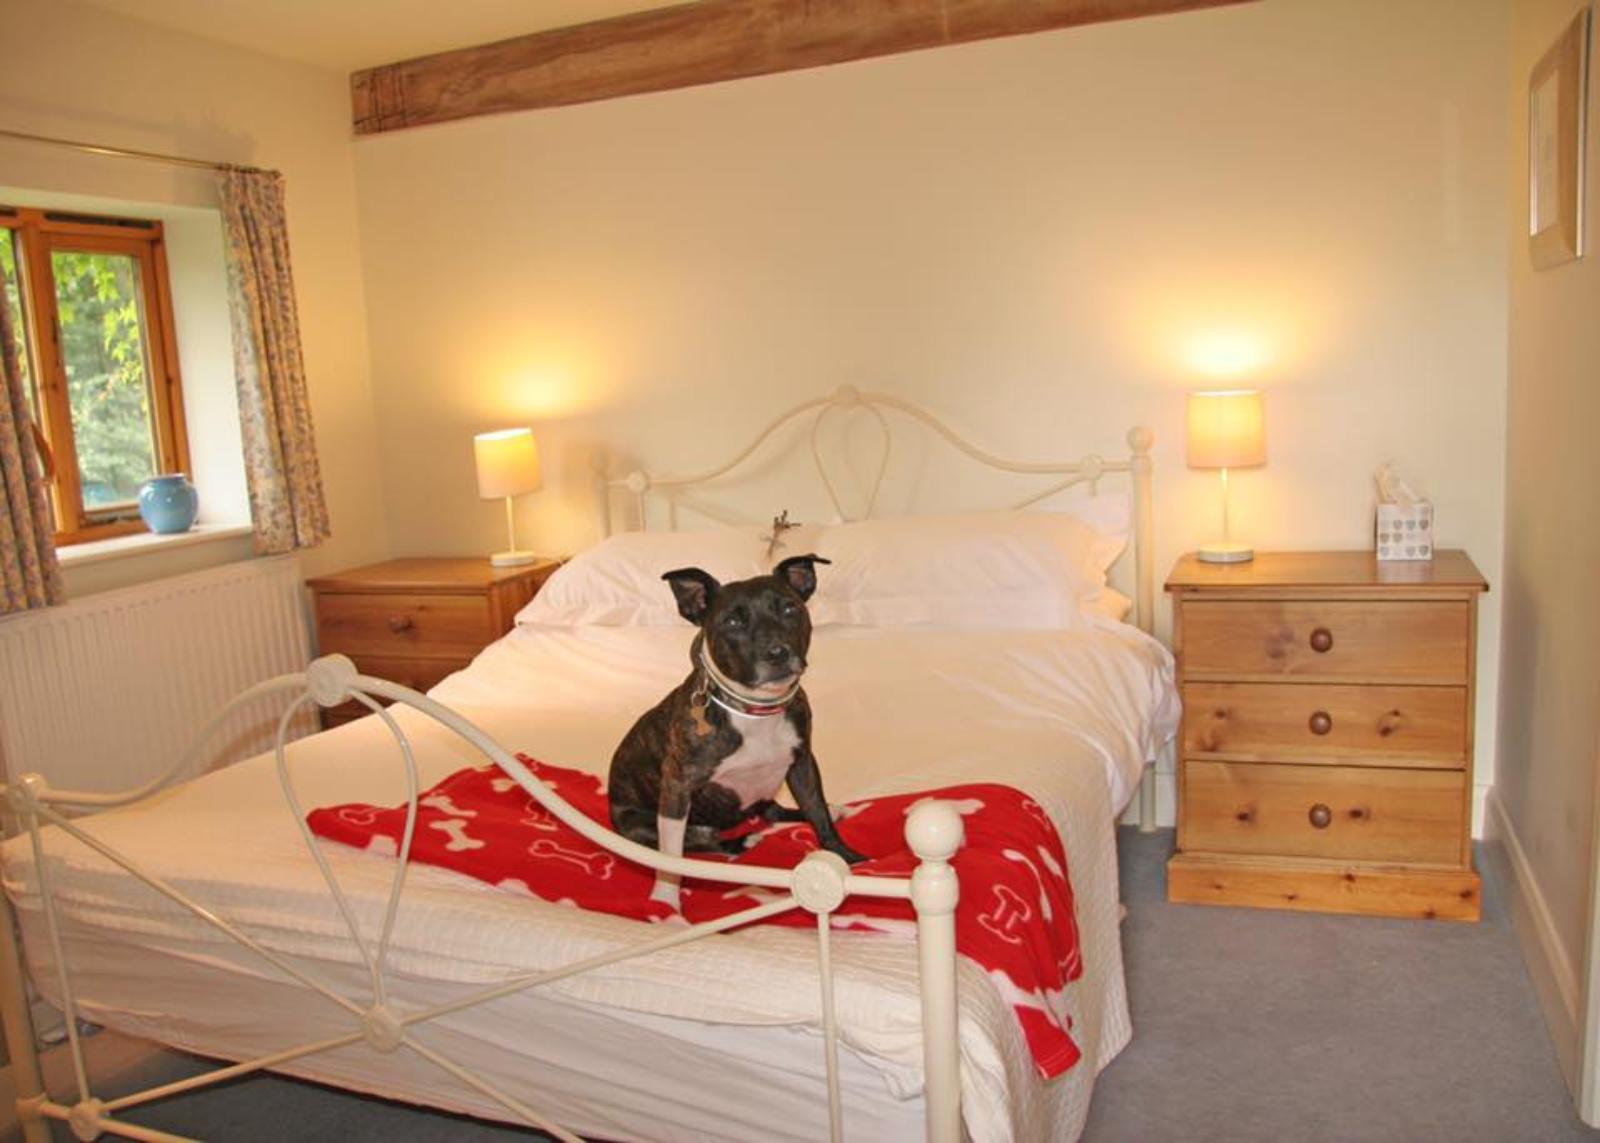 We are as dog friendly as it's possible to be! The Hayloft